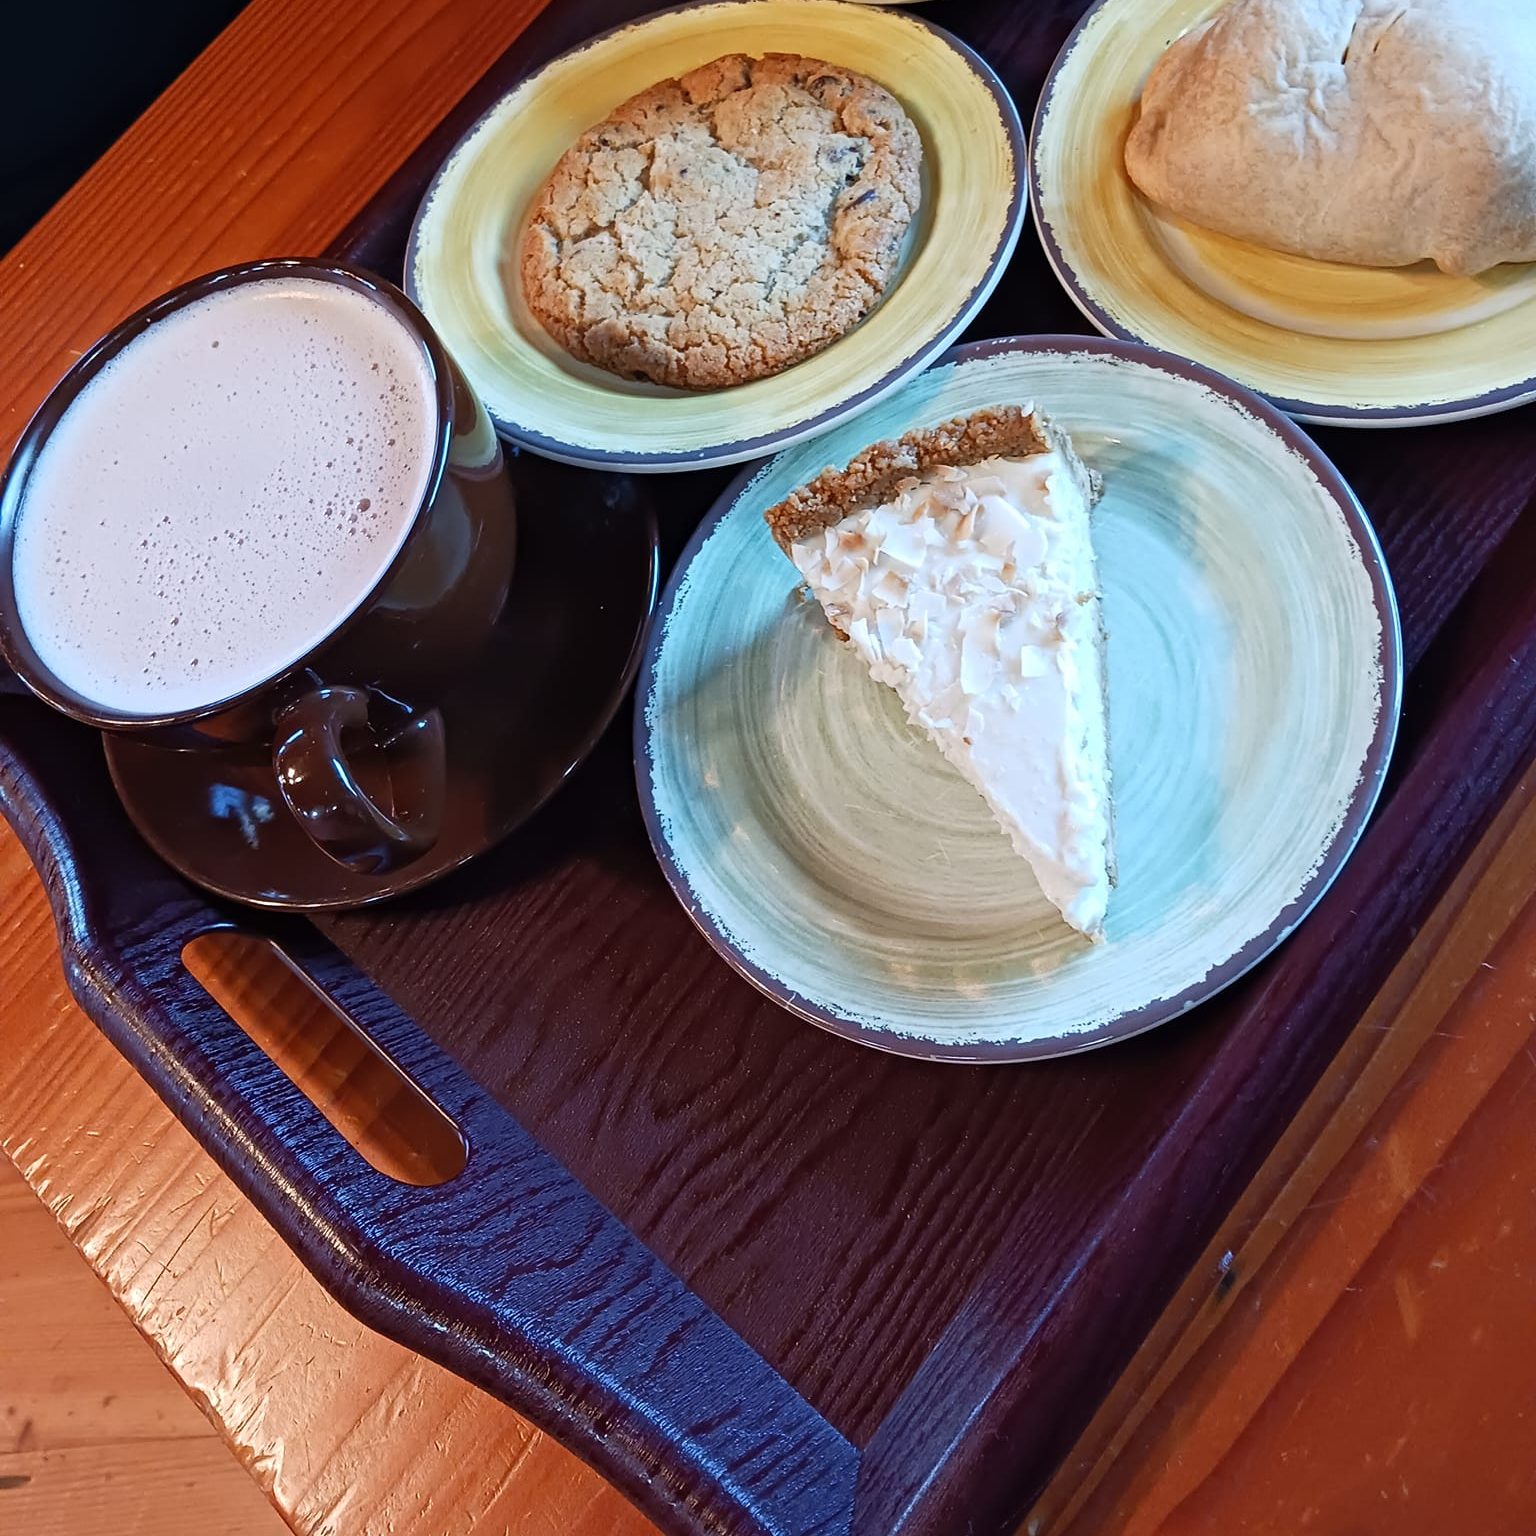 slices of pie, a hand pie and a latte on a tray